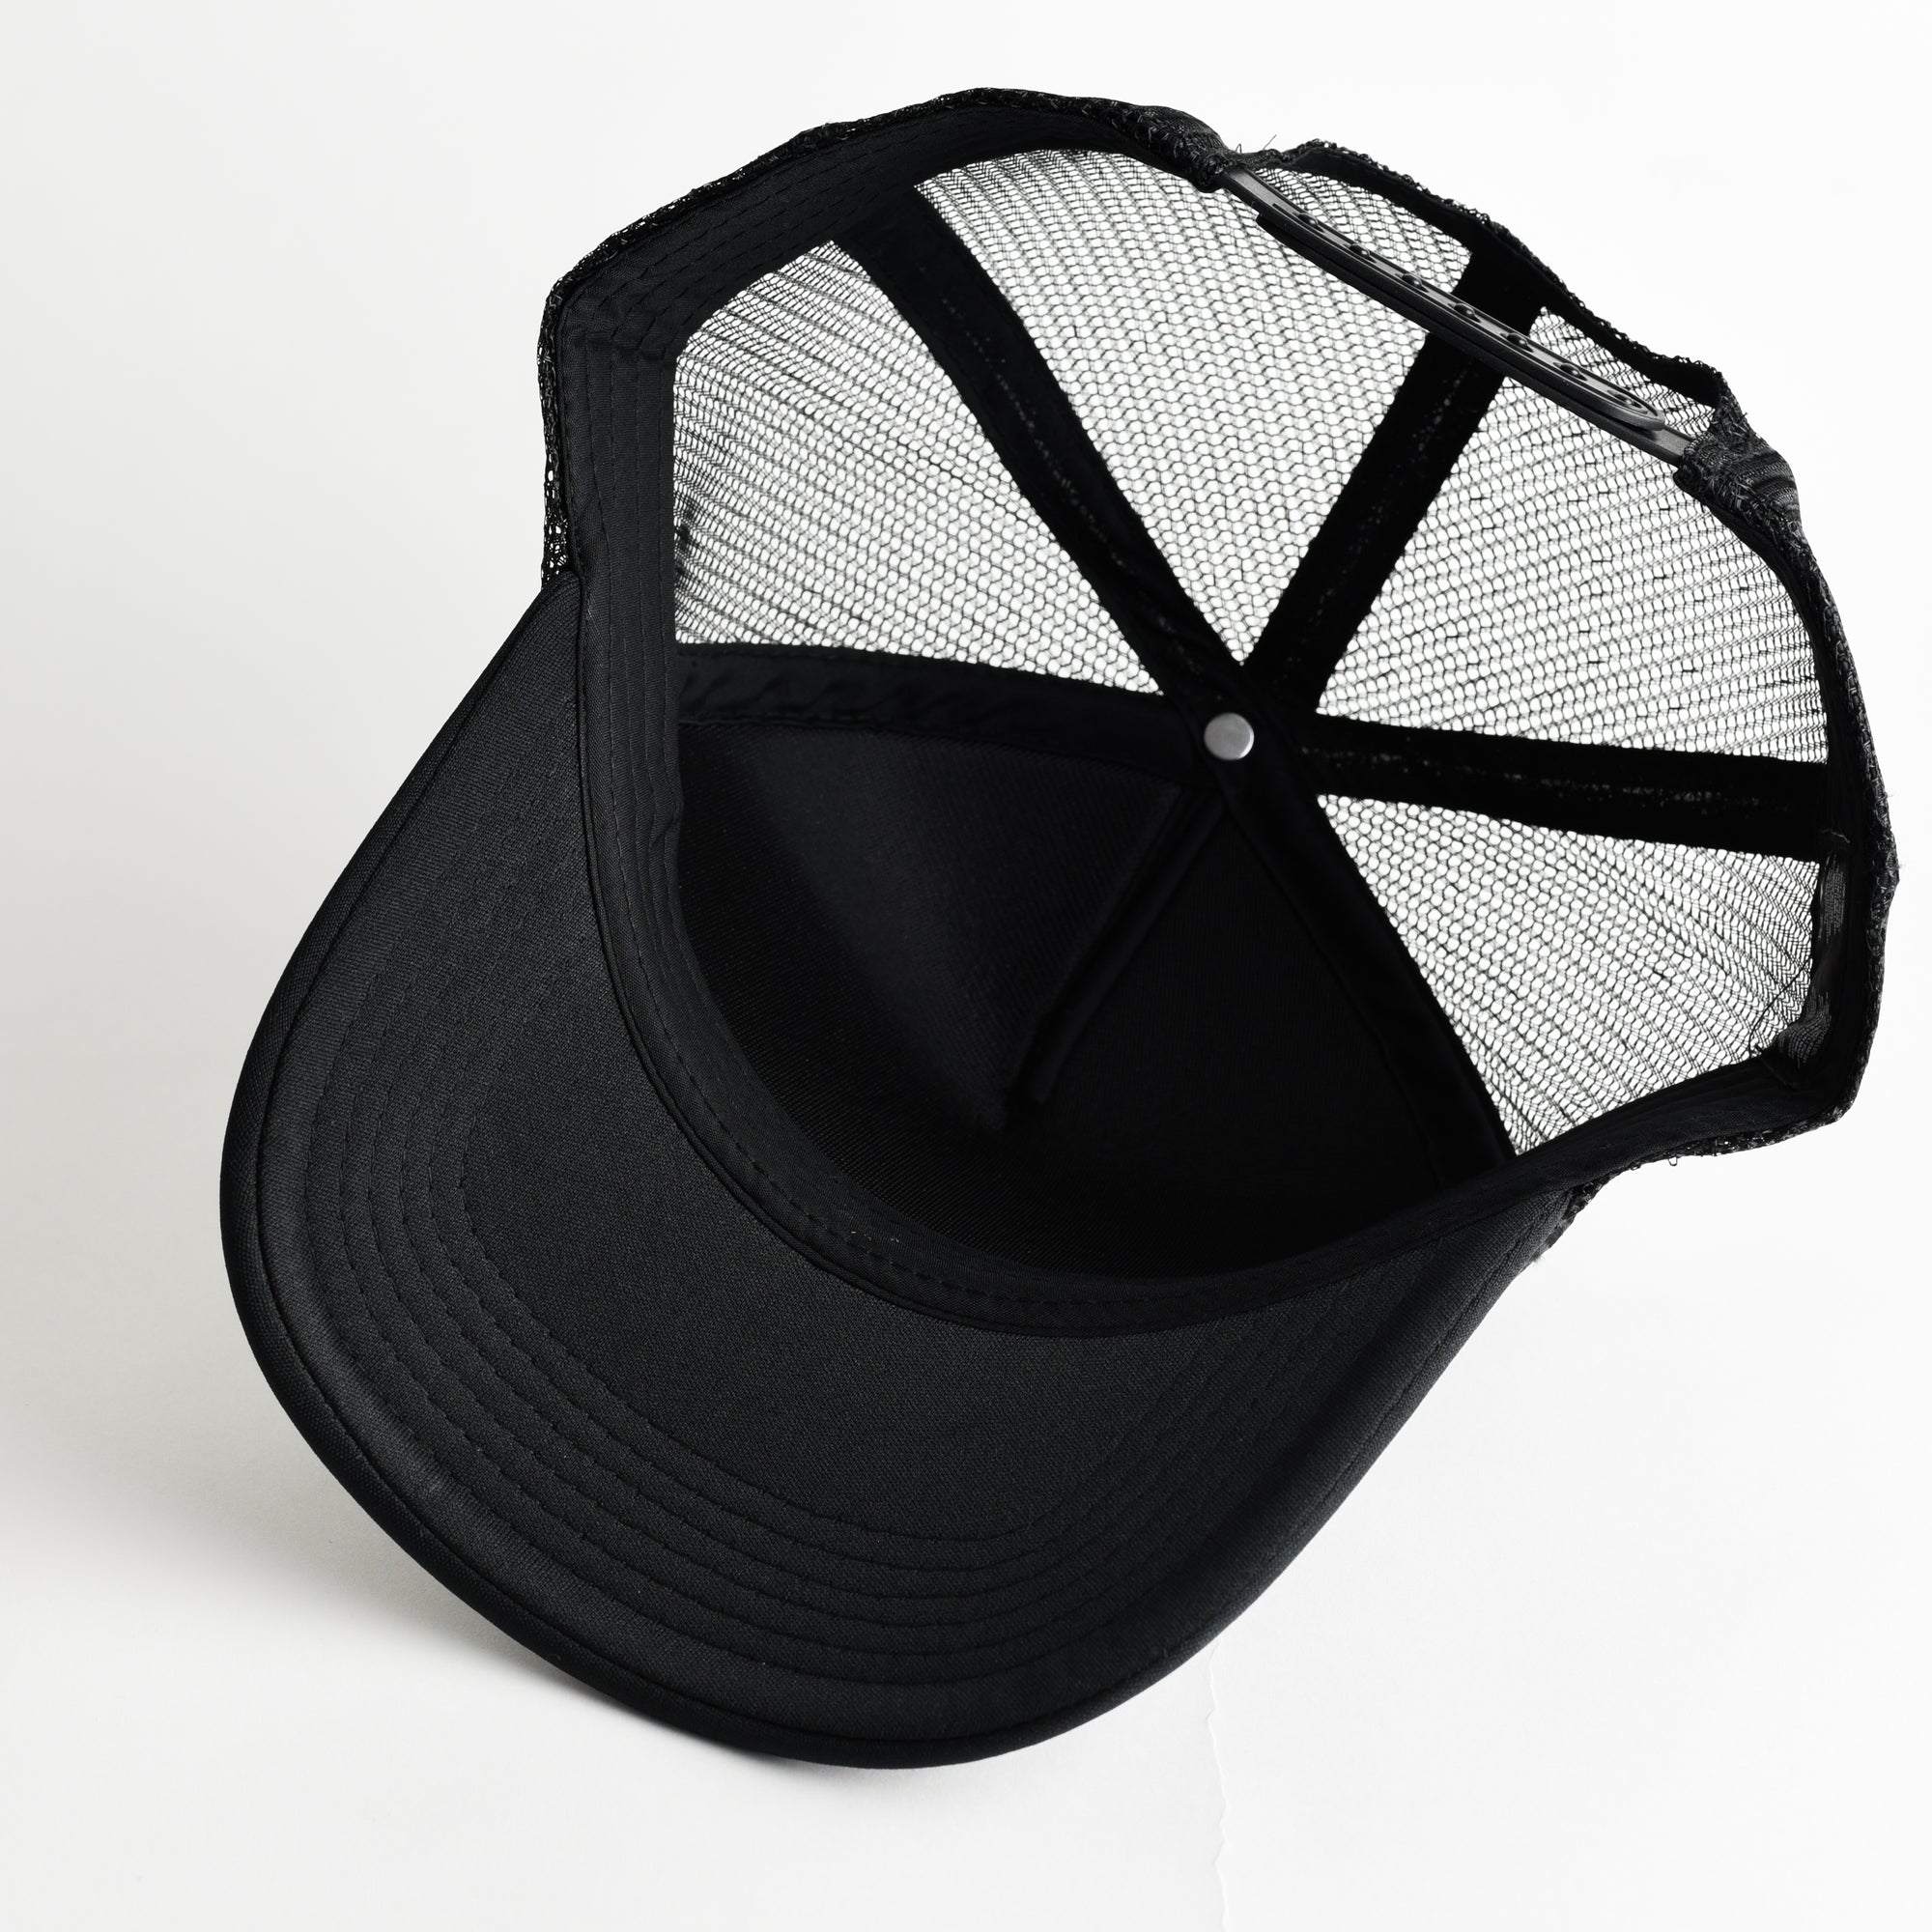 Après All Day Recycled Trucker Hat - black